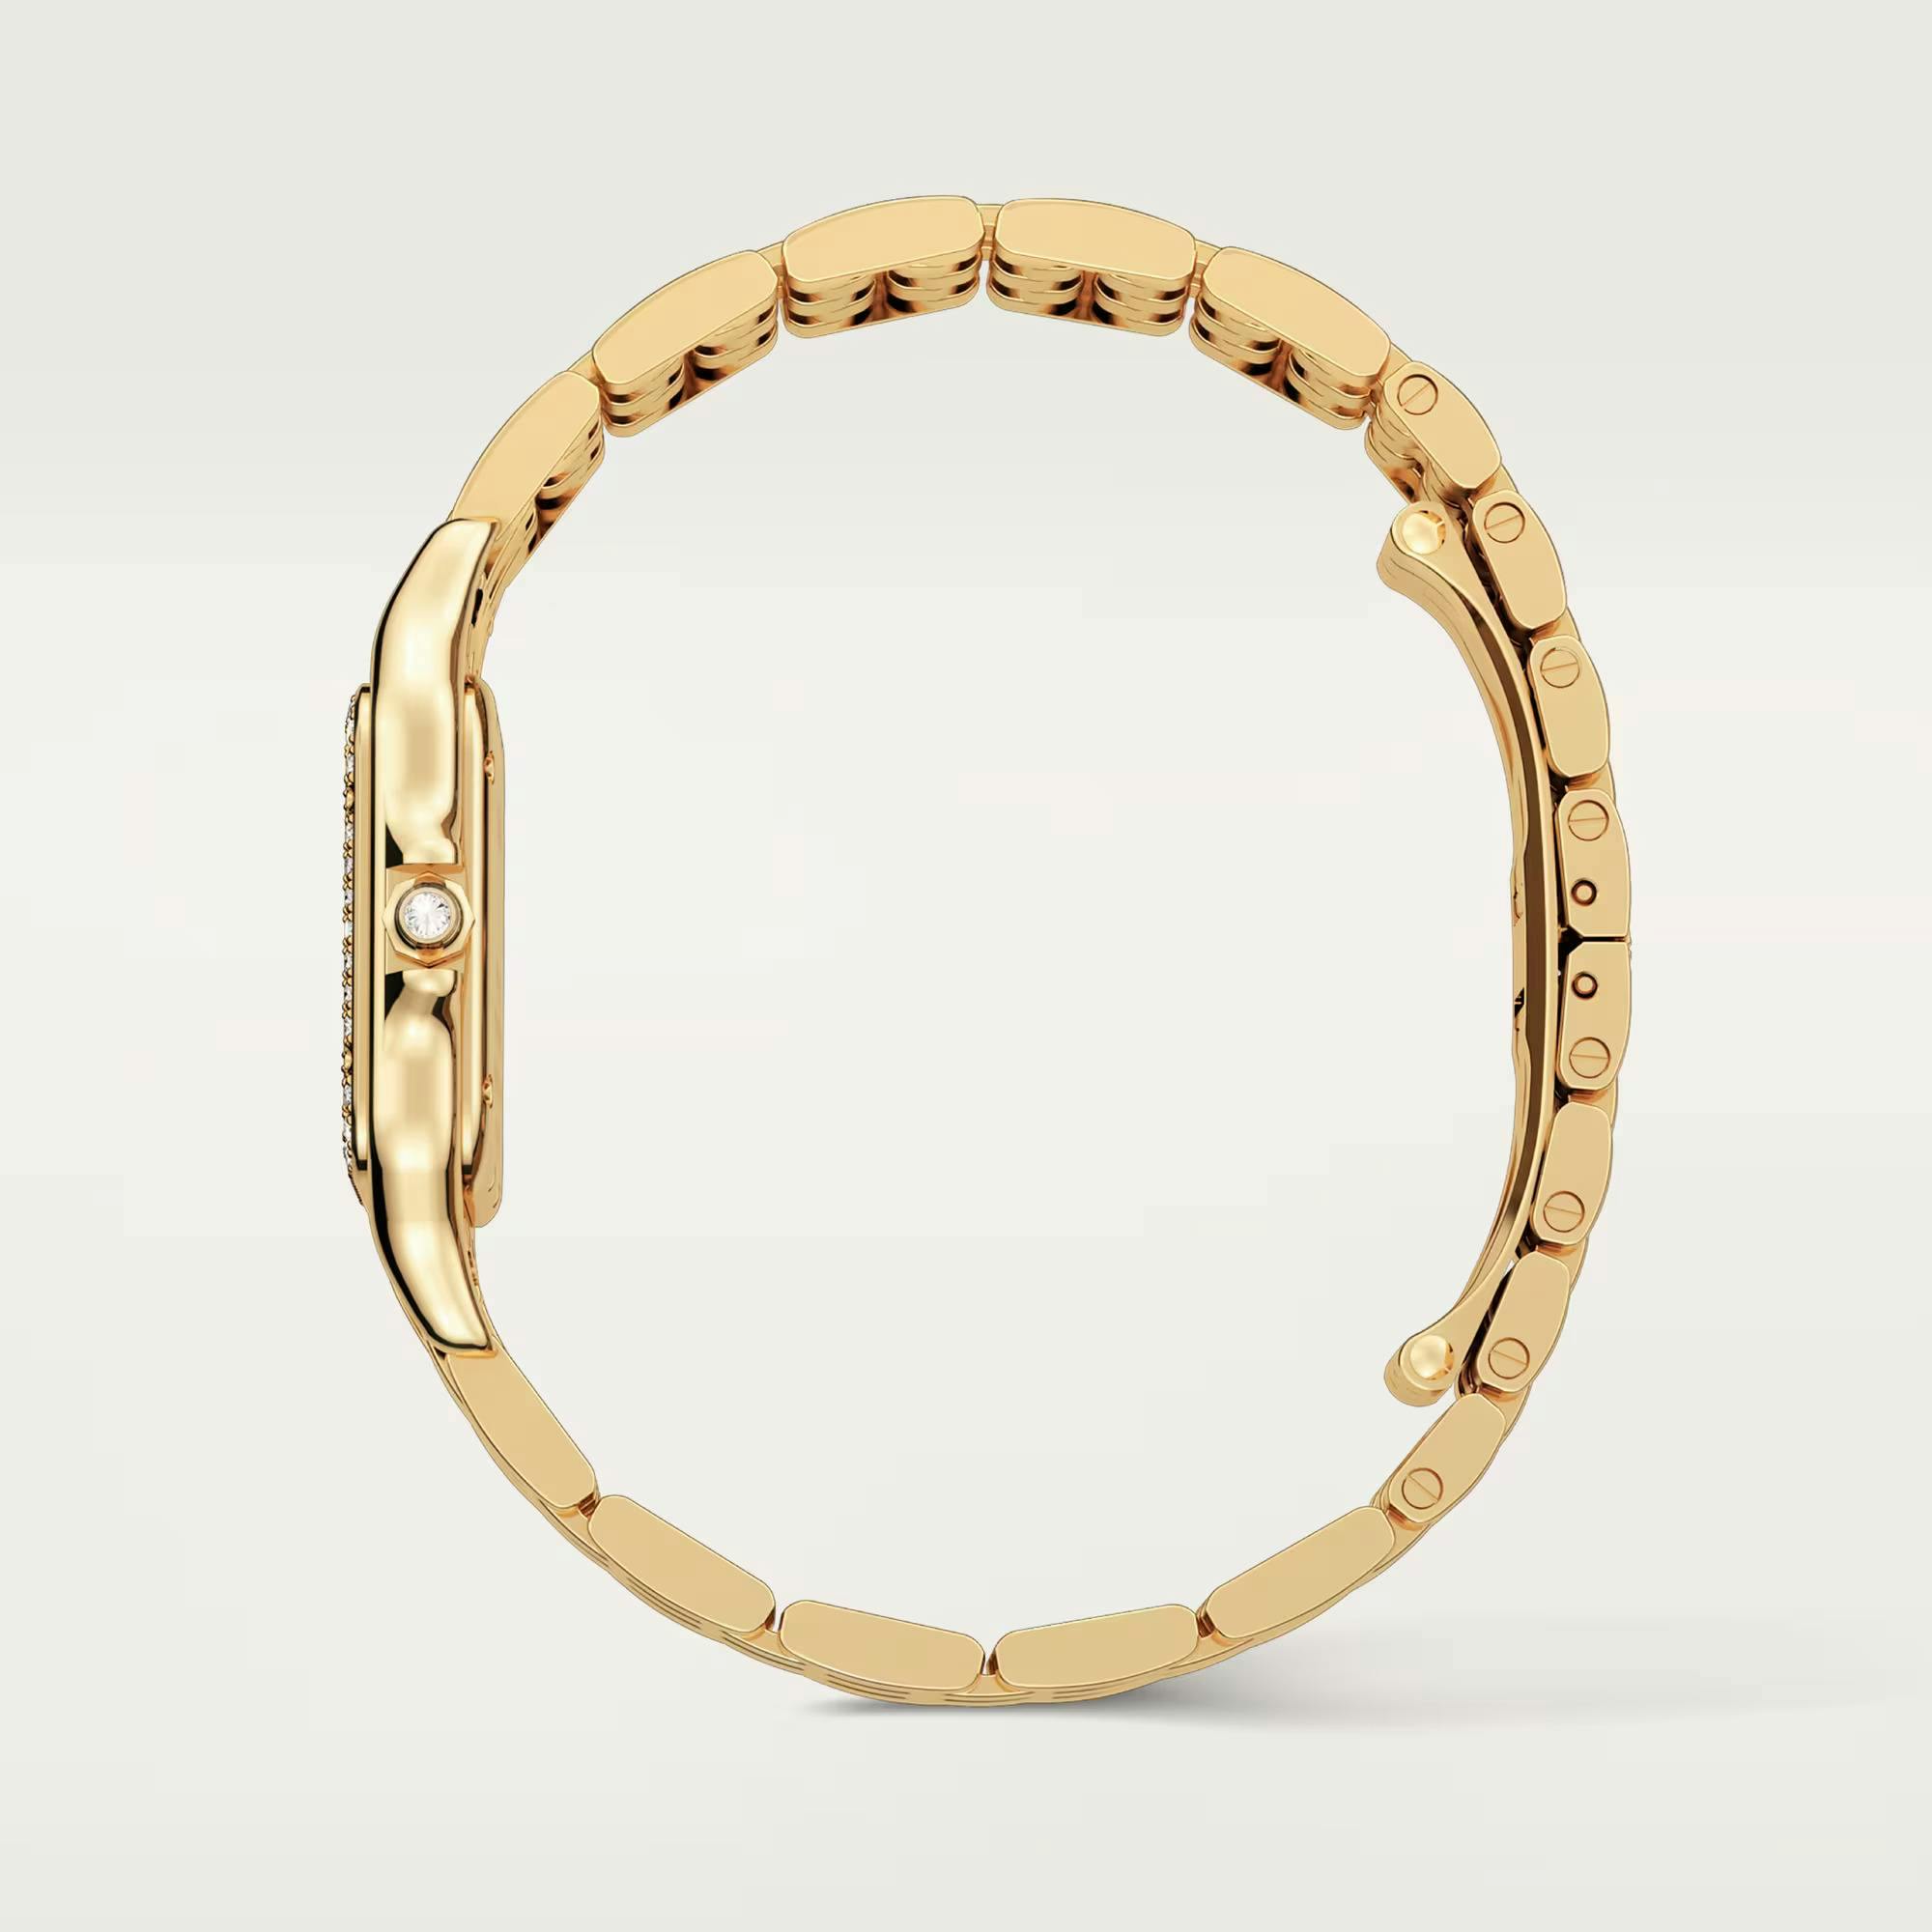 Panthere de Cartier Watch in Yellow Gold with Diamonds, medium model 4